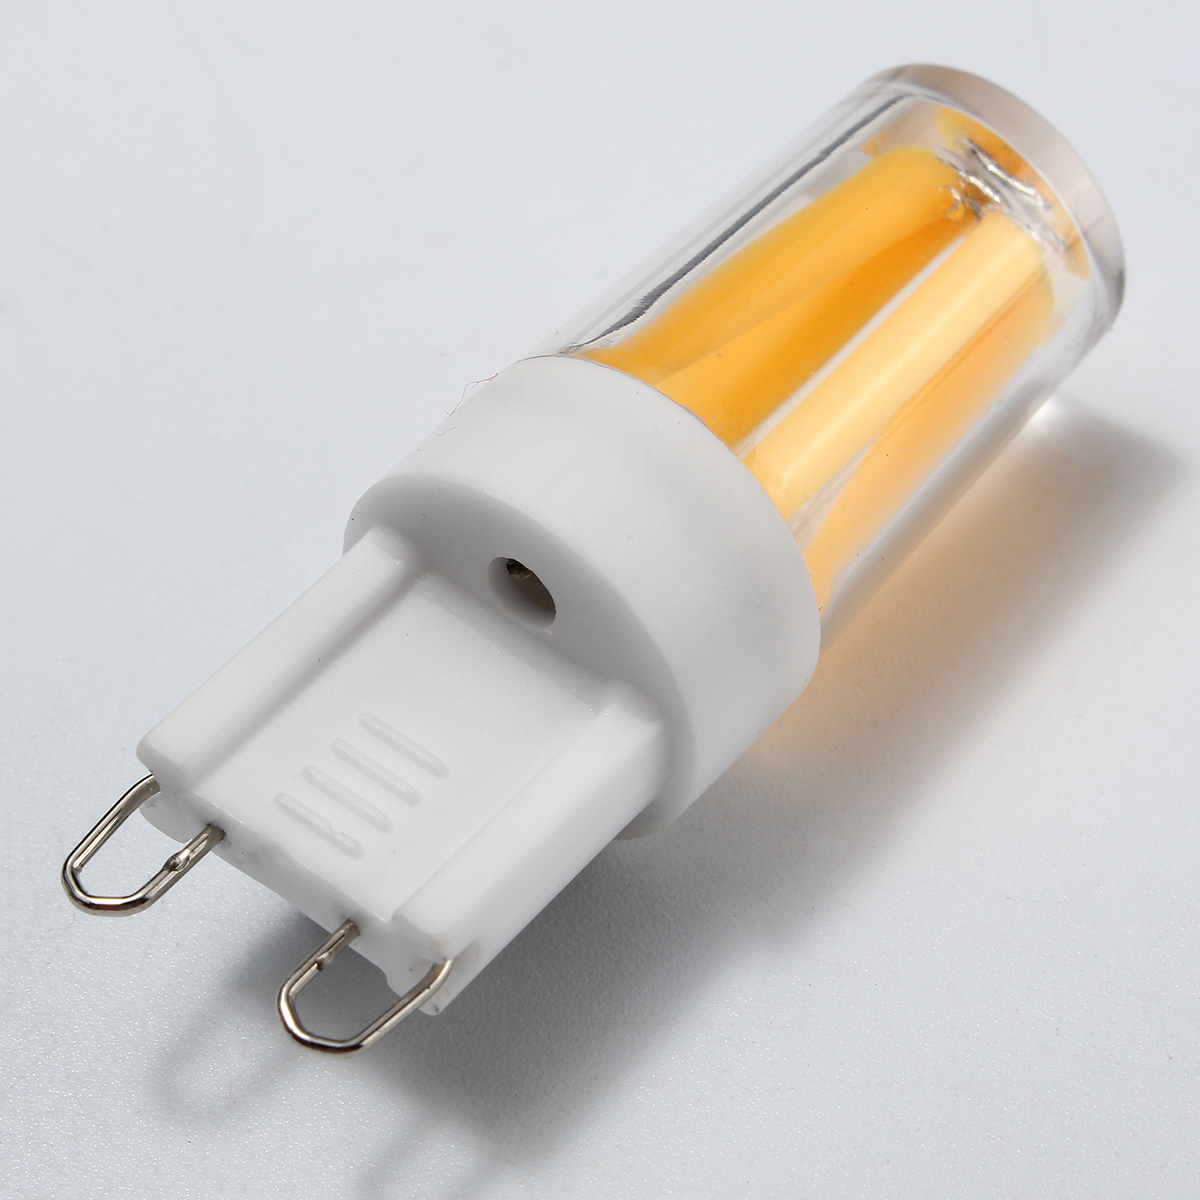 2W-G9-Dimmable-LED-Pure-White-Warm-White-Corn-Bulb-Silicone-Crystal-COB-Lamp-Light-AC-220V-1292383-4